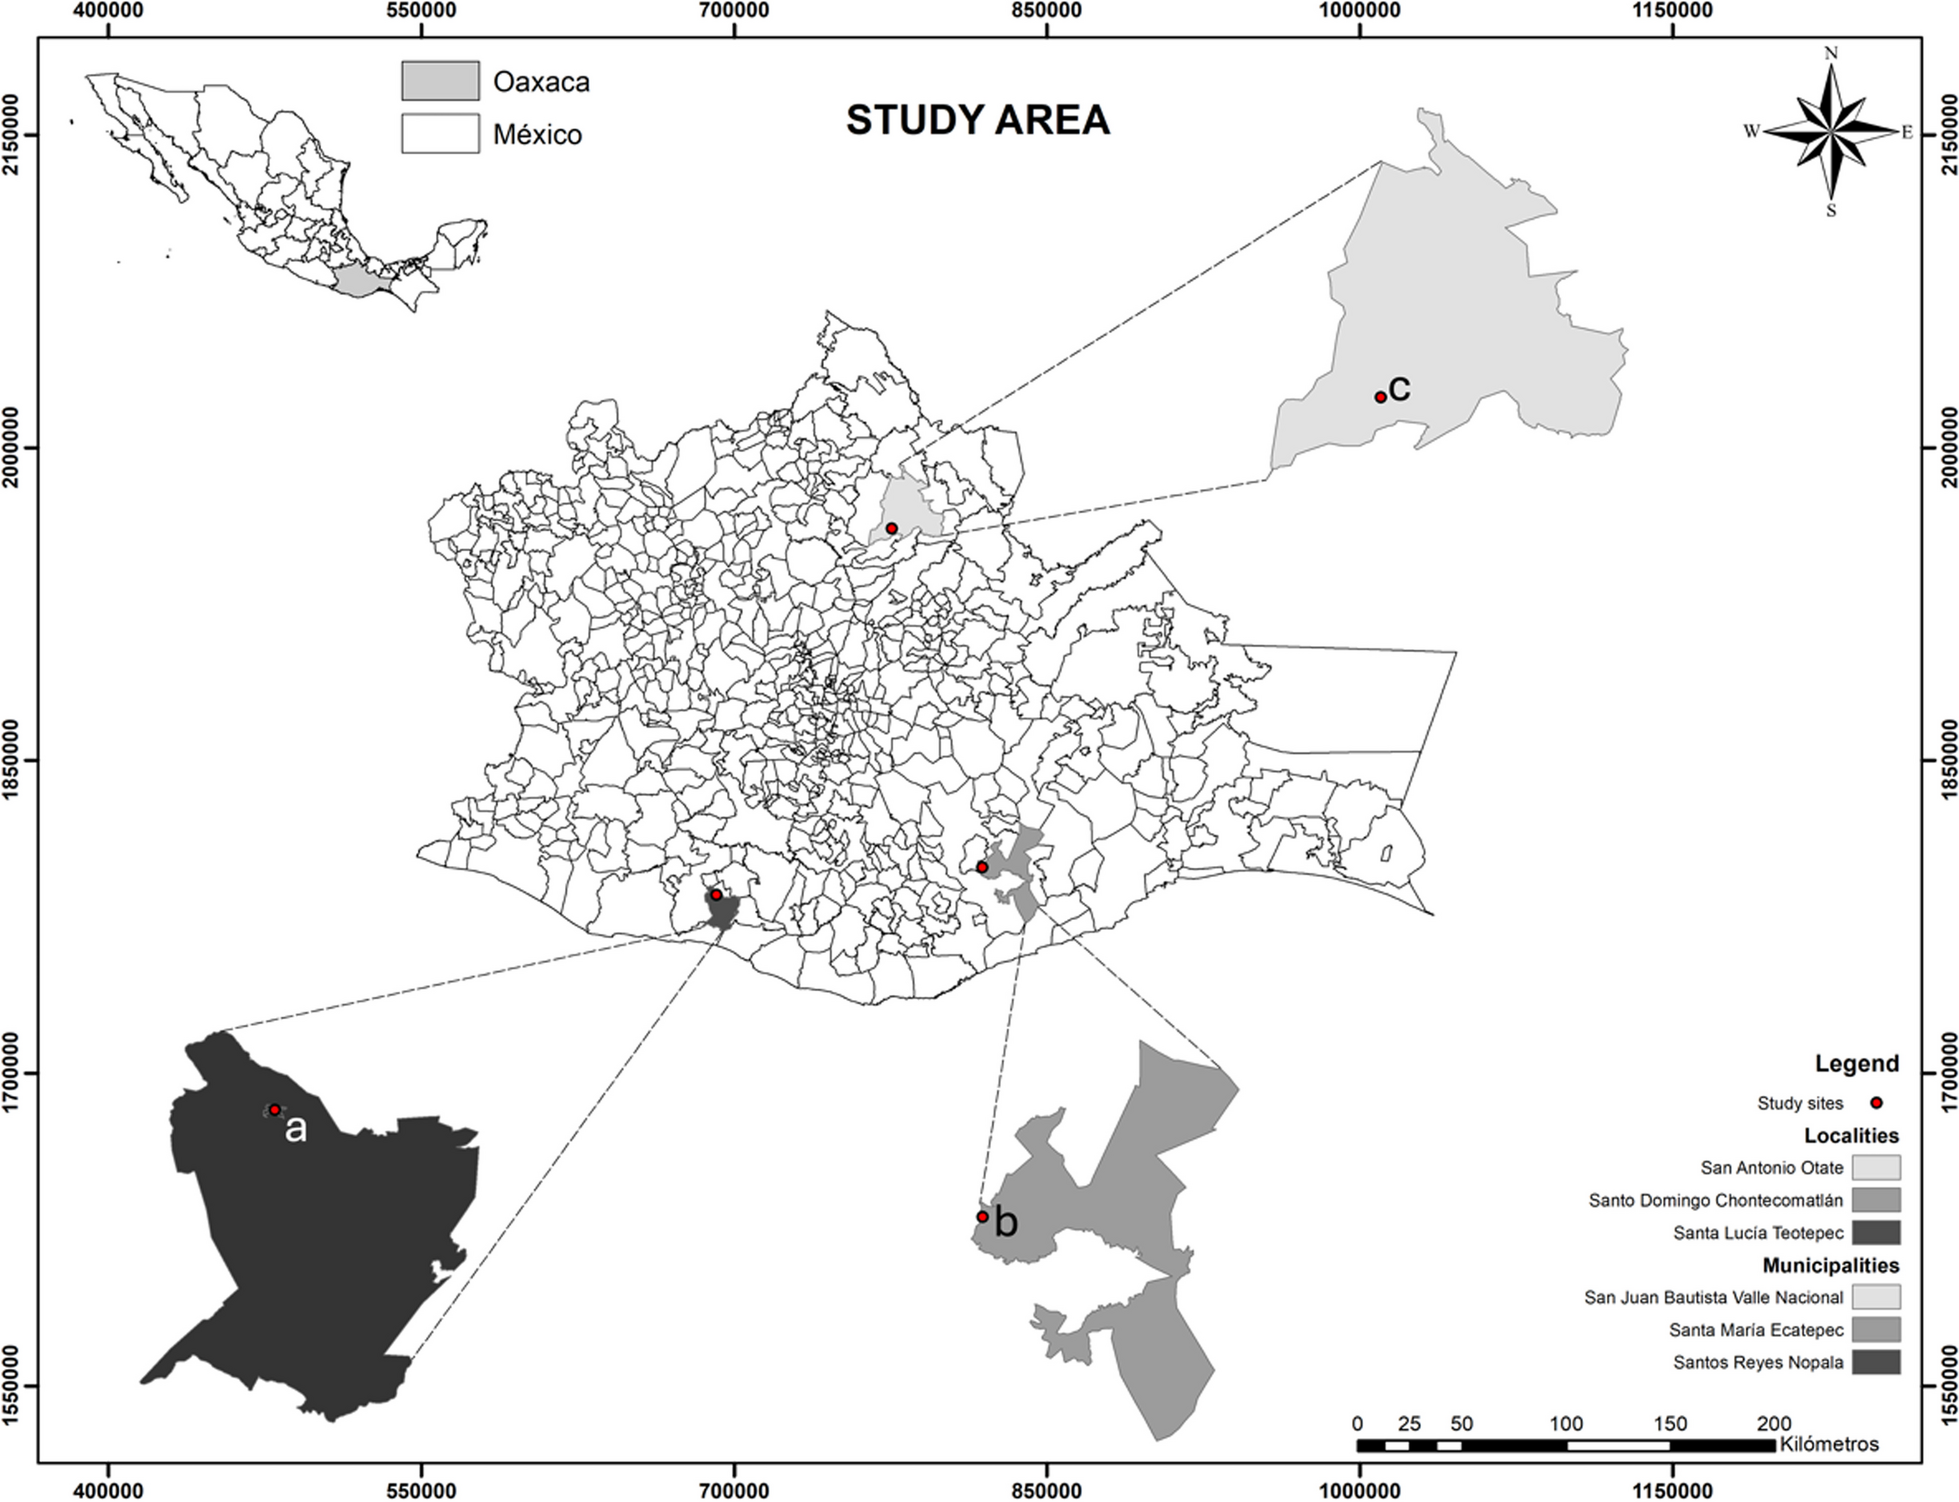 Variation in traditional knowledge of culturally important macromycete species among three indigenous communities of Oaxaca, Mexico